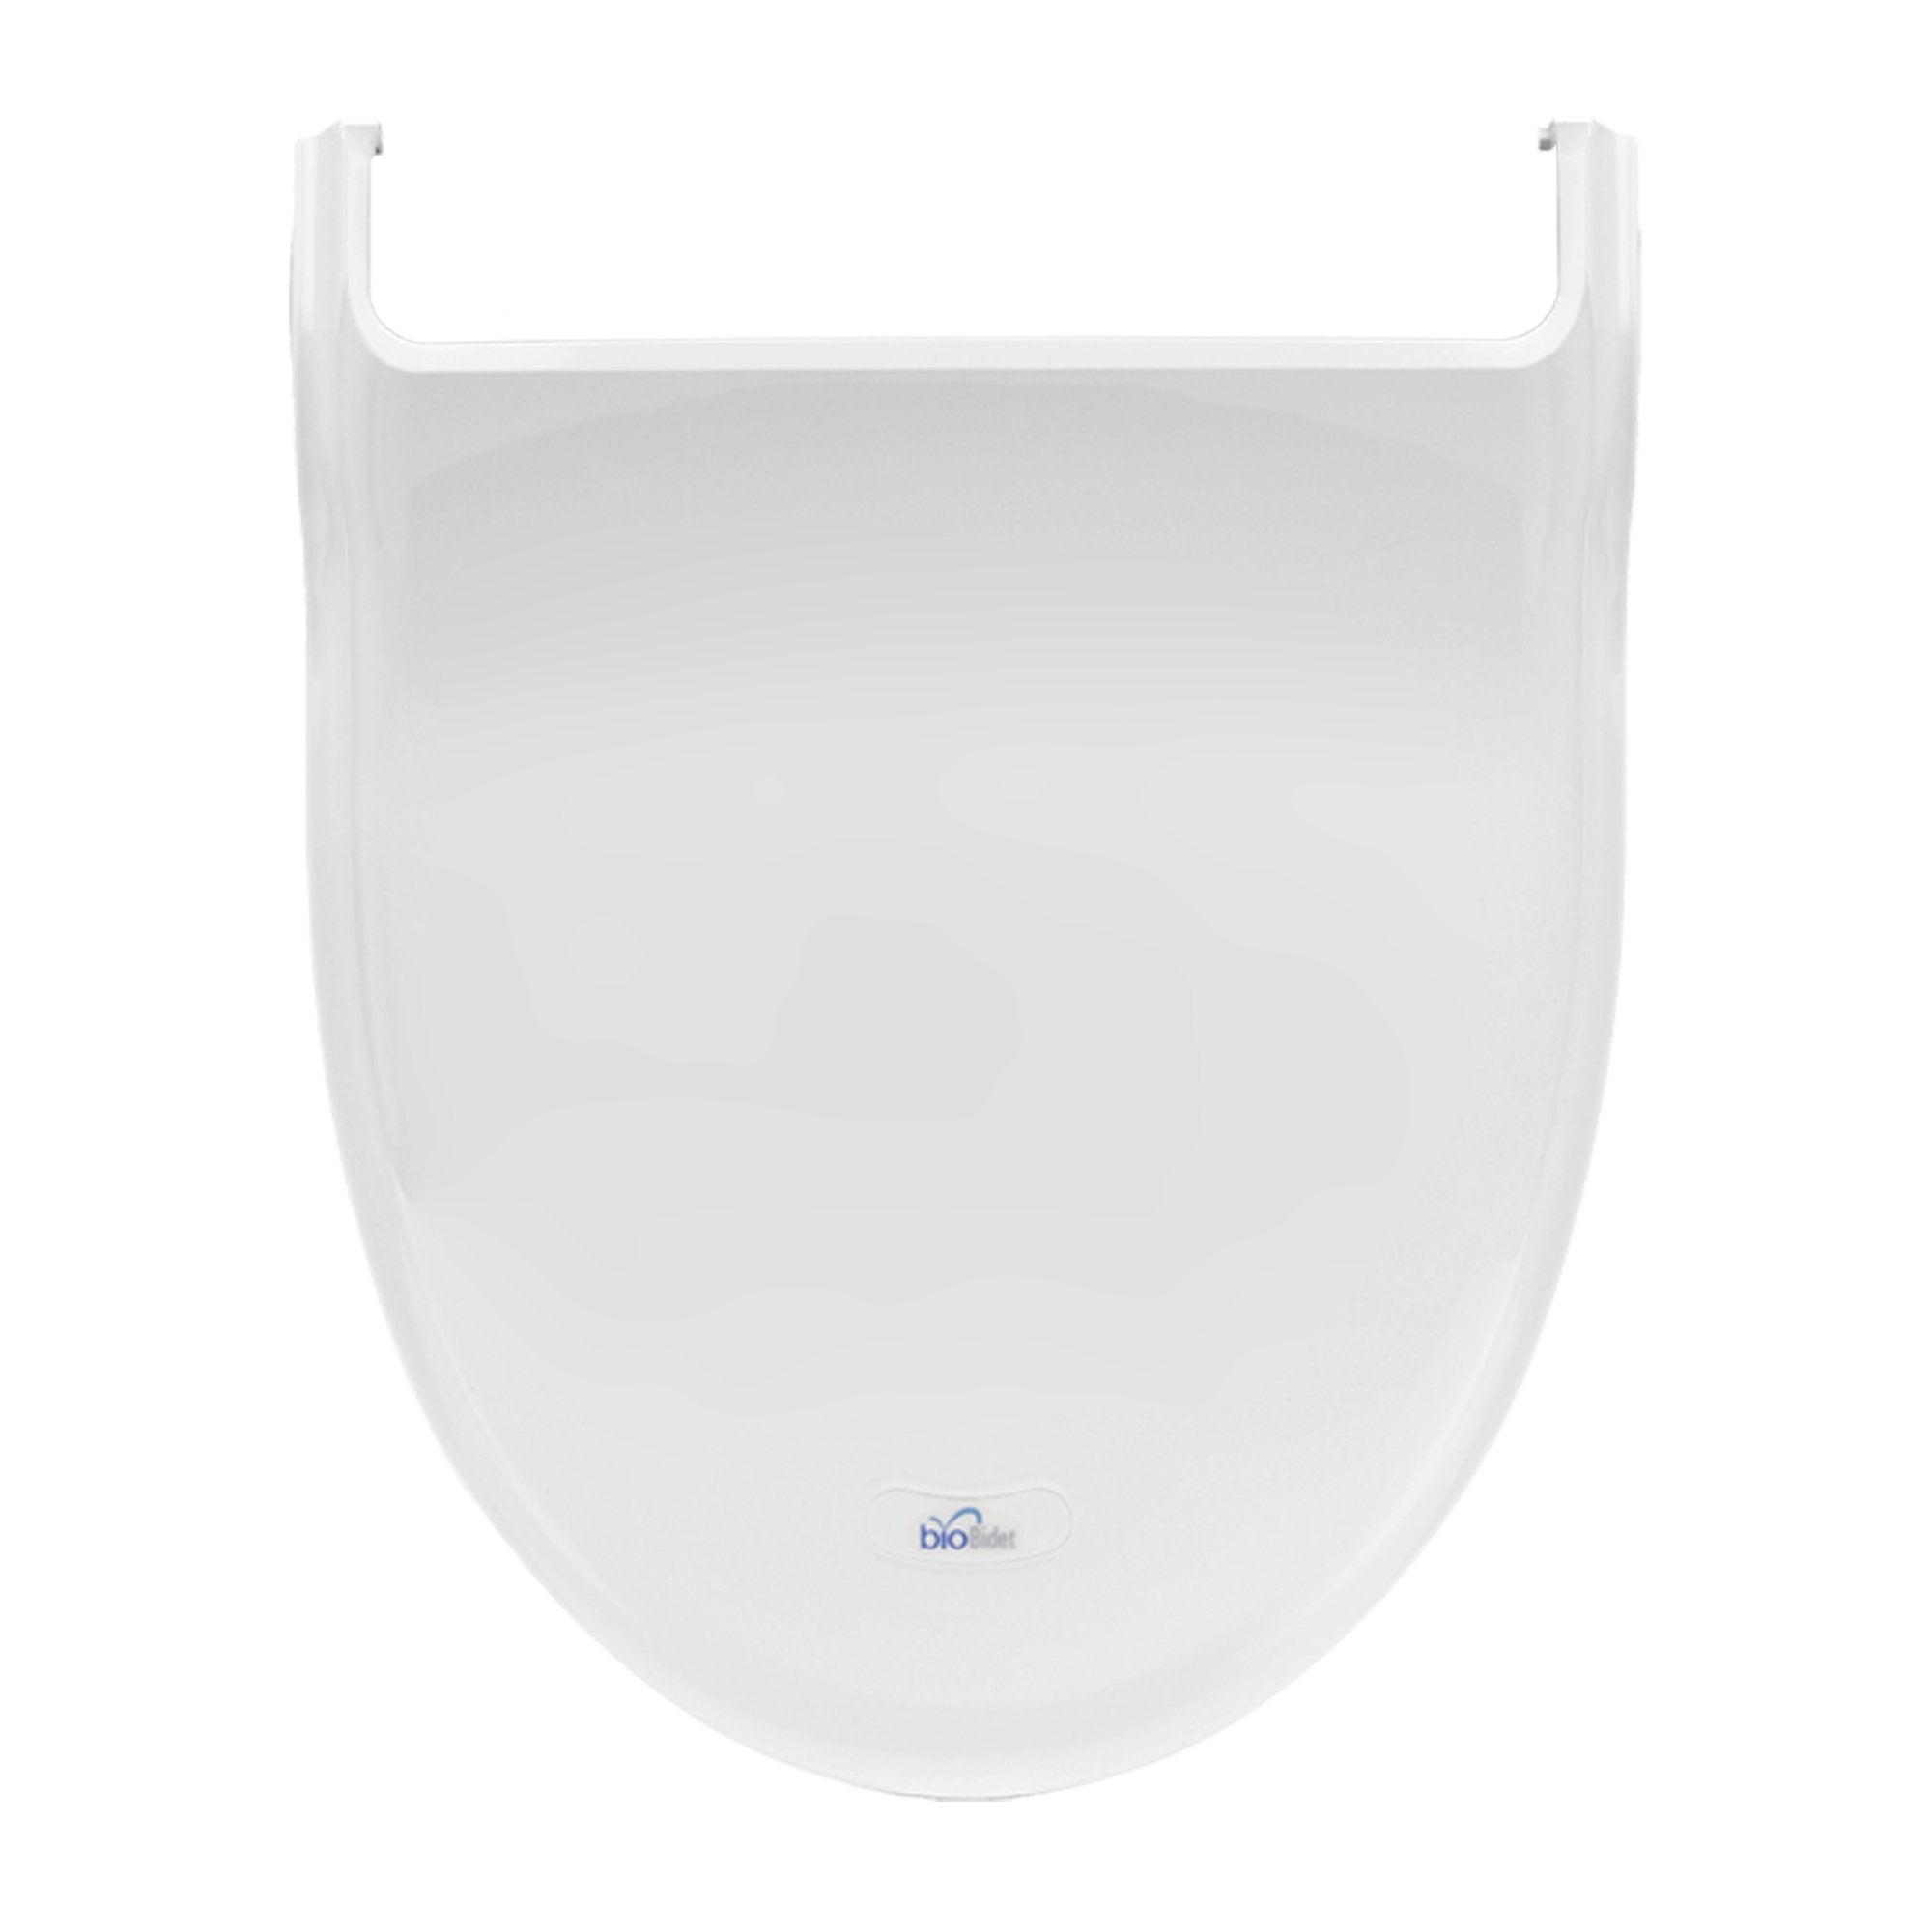 All Replacement Lids - Official Parts - Bio Bidet by